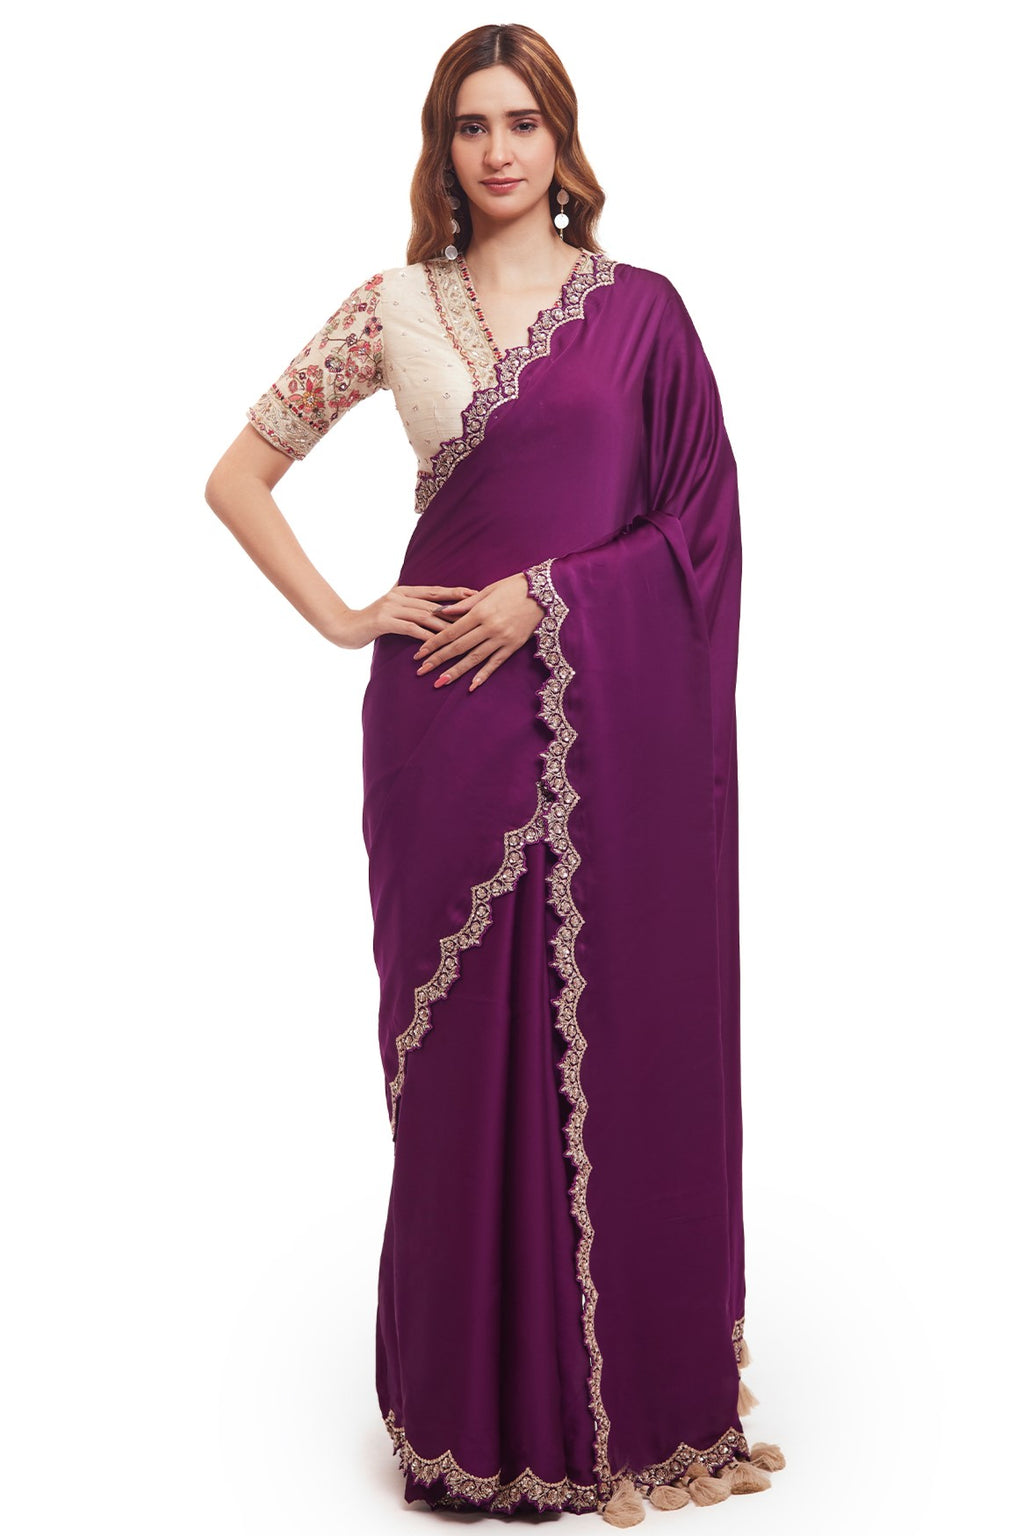 Shop purple organza satin saree online in USA with embroidered saree blouse. Look your best at parties and weddings in beautiful designer sarees, embroidered sarees, handwoven sarees, silk sarees, organza saris from Pure Elegance Indian saree store in USA.-full view